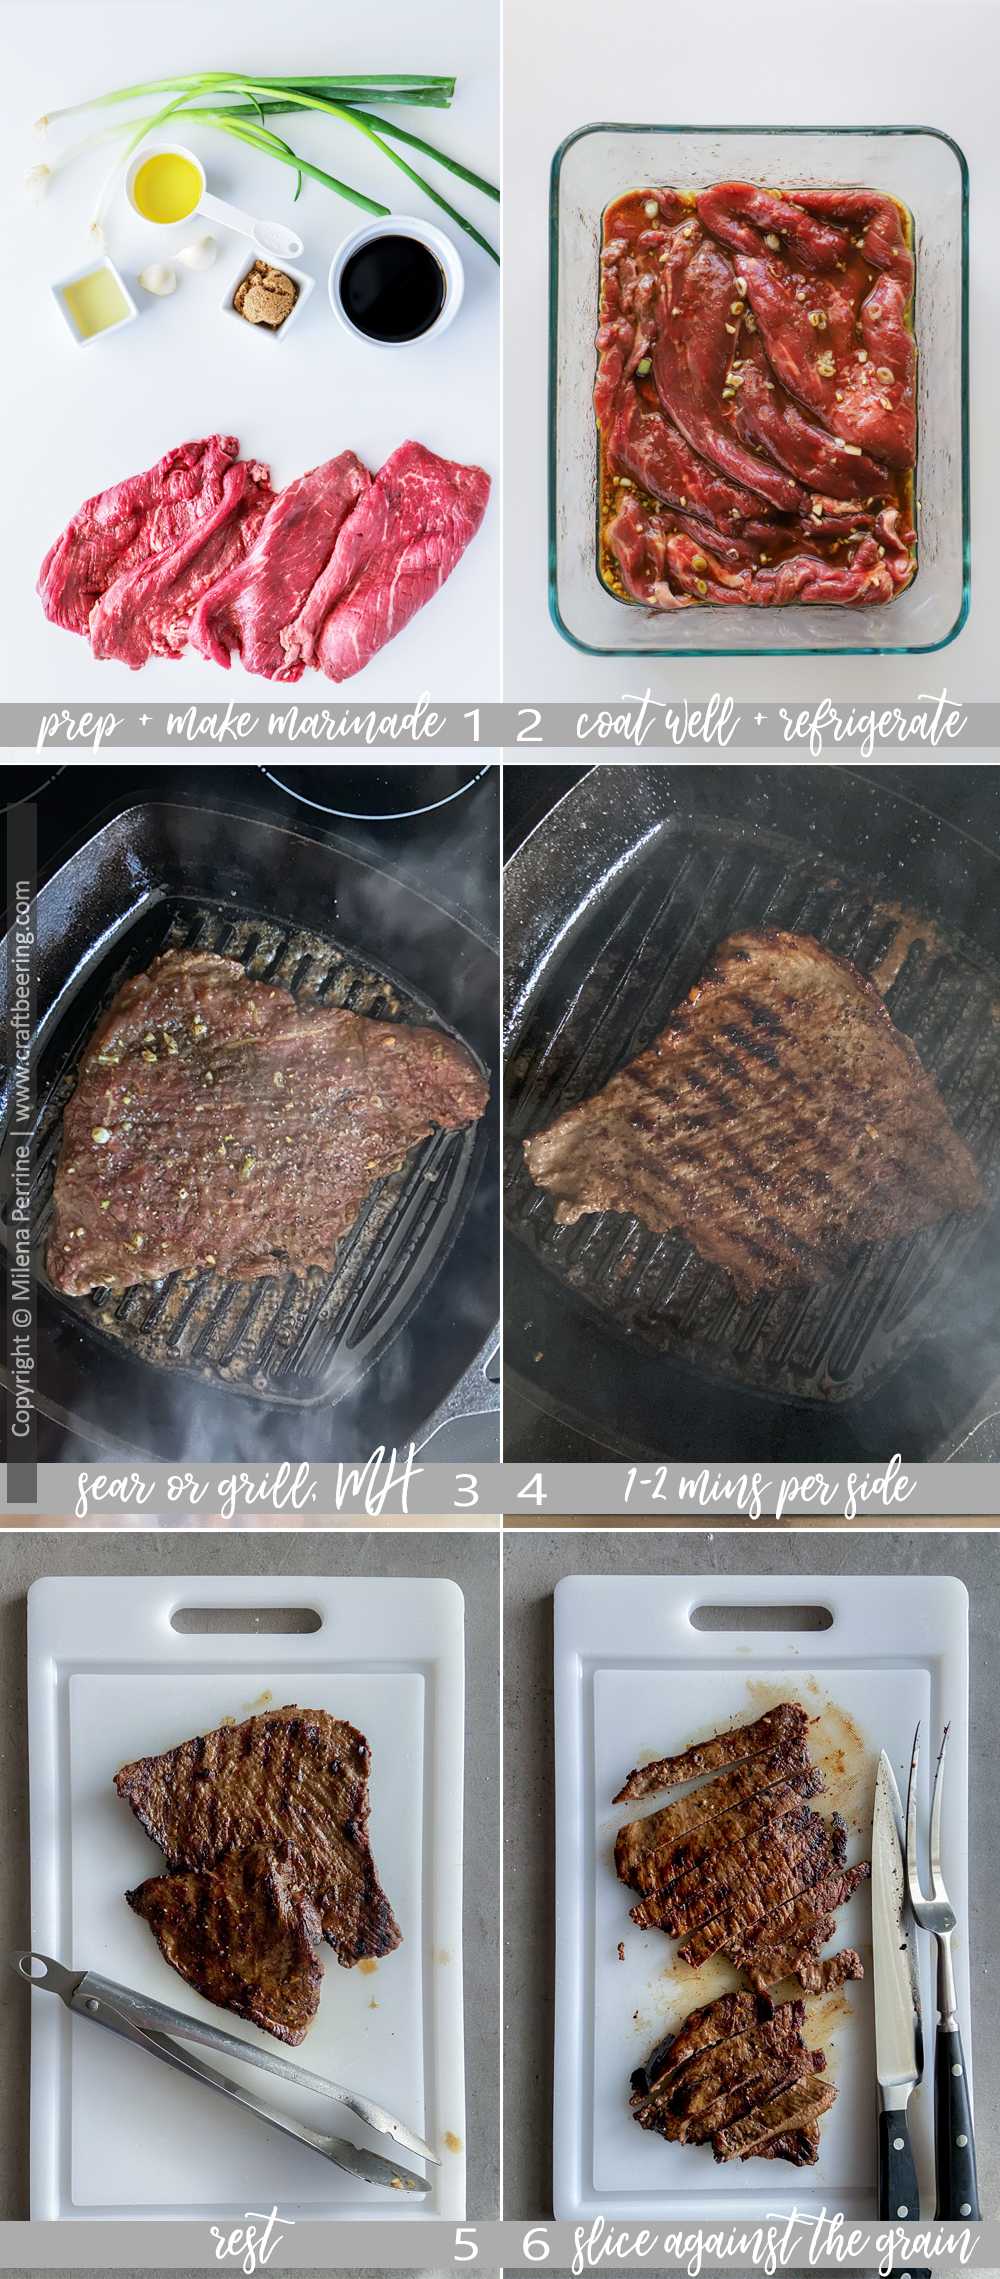 Step by step how to cook sirloin tip steak on the stove or grill.